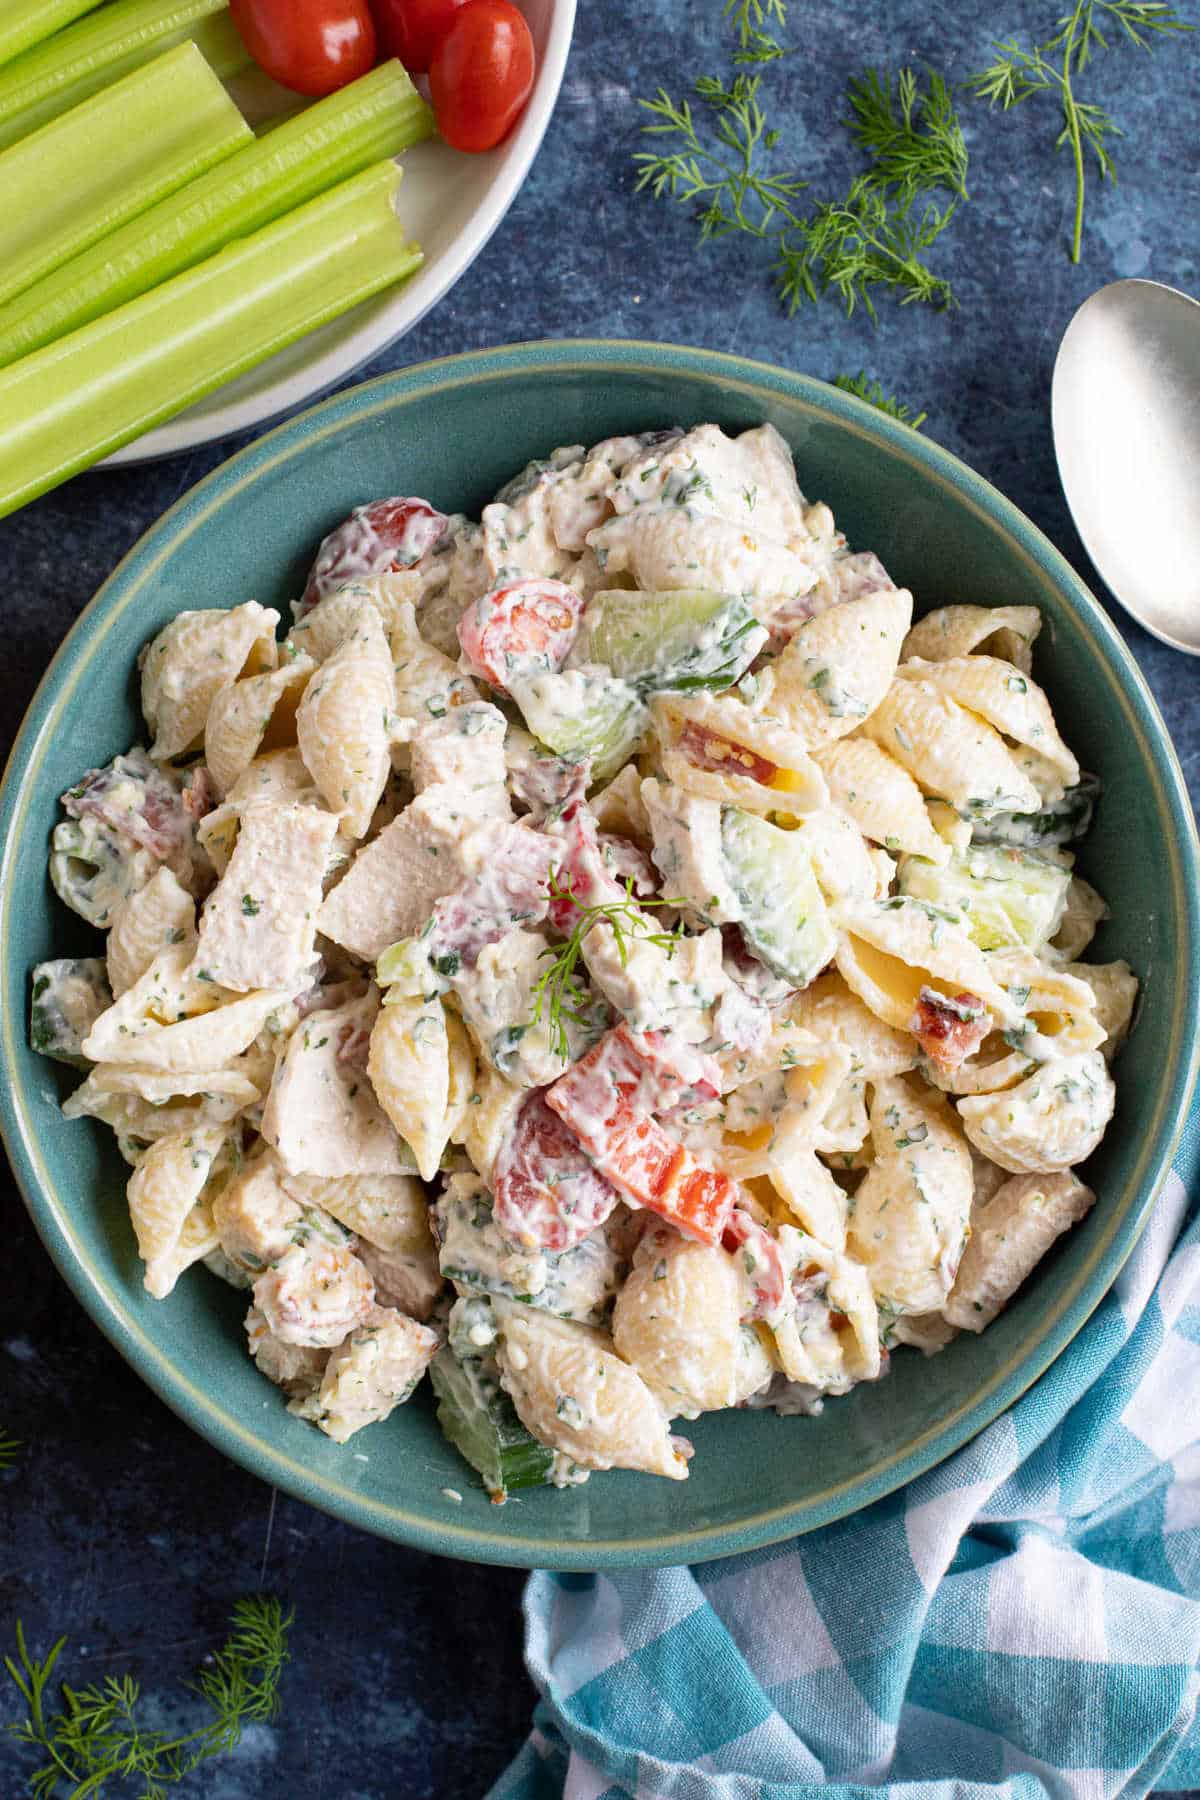 Chicken bacon ranch pasta salad in a serving dish.